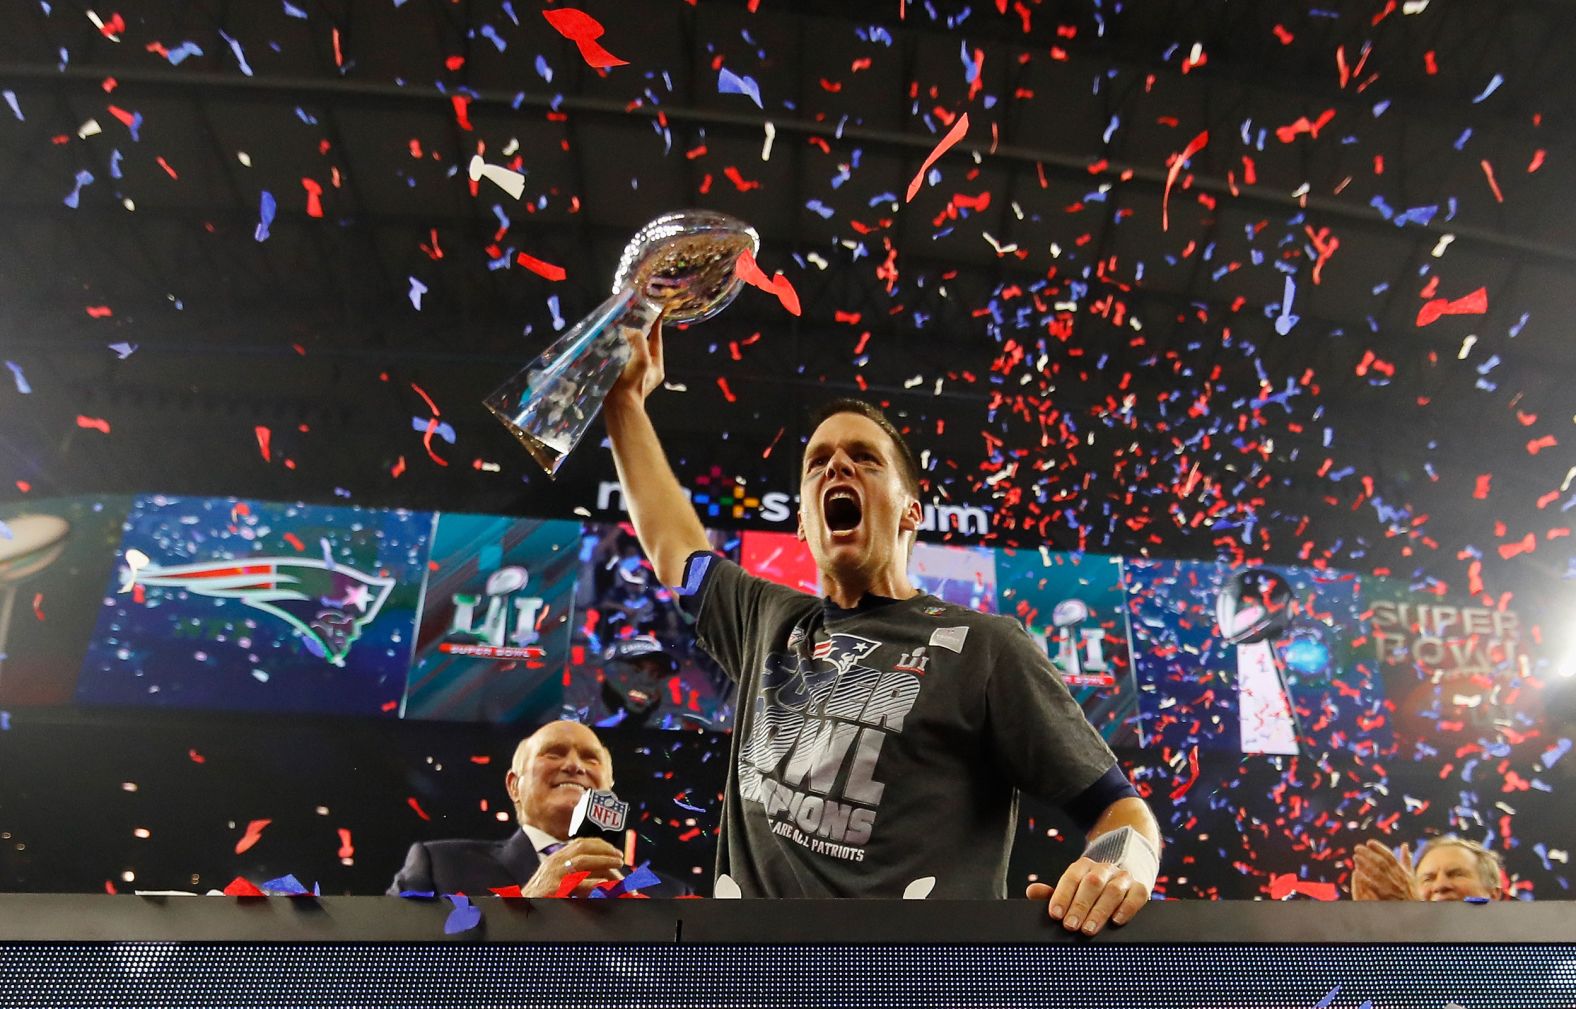 <strong>Super Bowl LI (2017):</strong> Tom Brady threw for a Super Bowl-record 466 yards as New England completed the biggest comeback in Super Bowl history. The Patriots trailed Atlanta 28-3 in the third quarter but rallied to win in overtime. It was Brady's fourth MVP award.